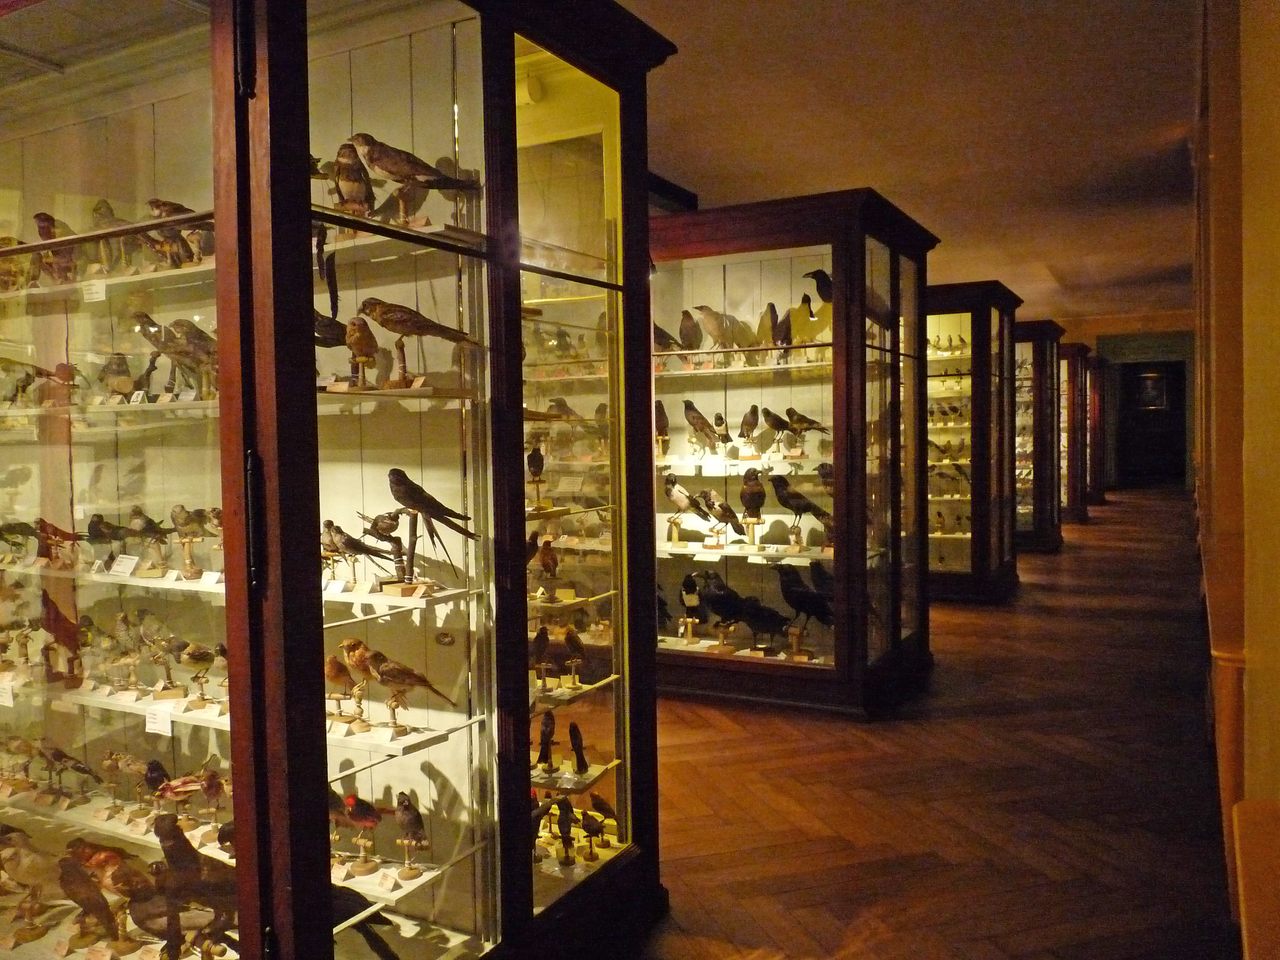 Somewhere within the halls of the Strasbourg Zoological Museum, you might stumble upon a hoax.